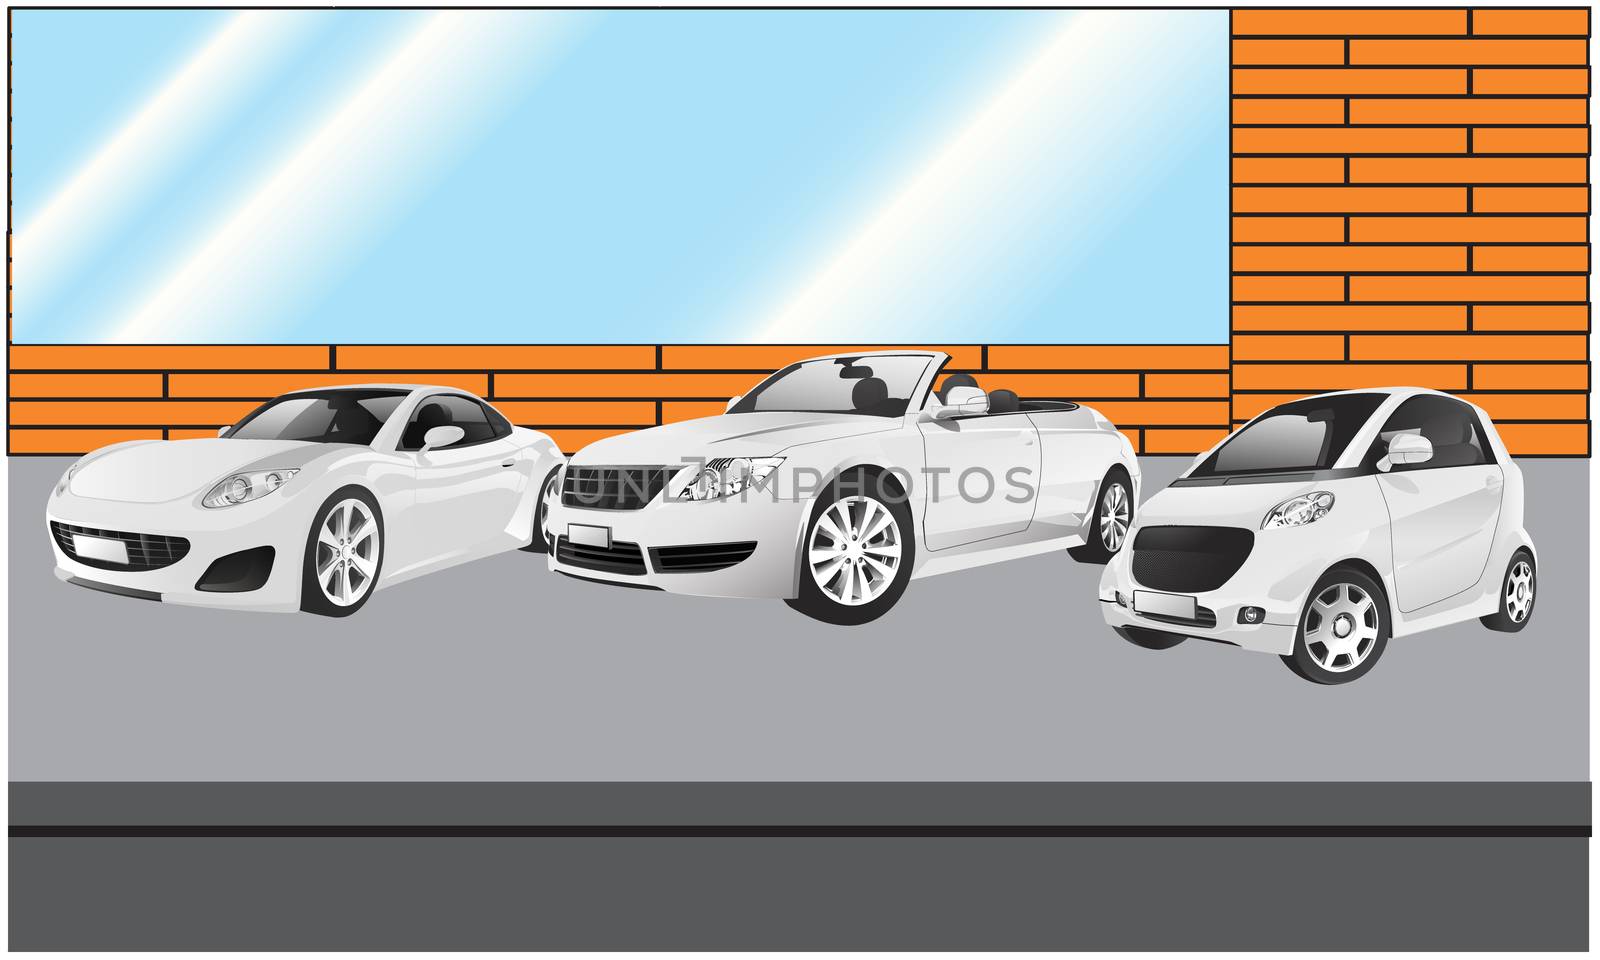 several cars parked outside the shop by aanavcreationsplus